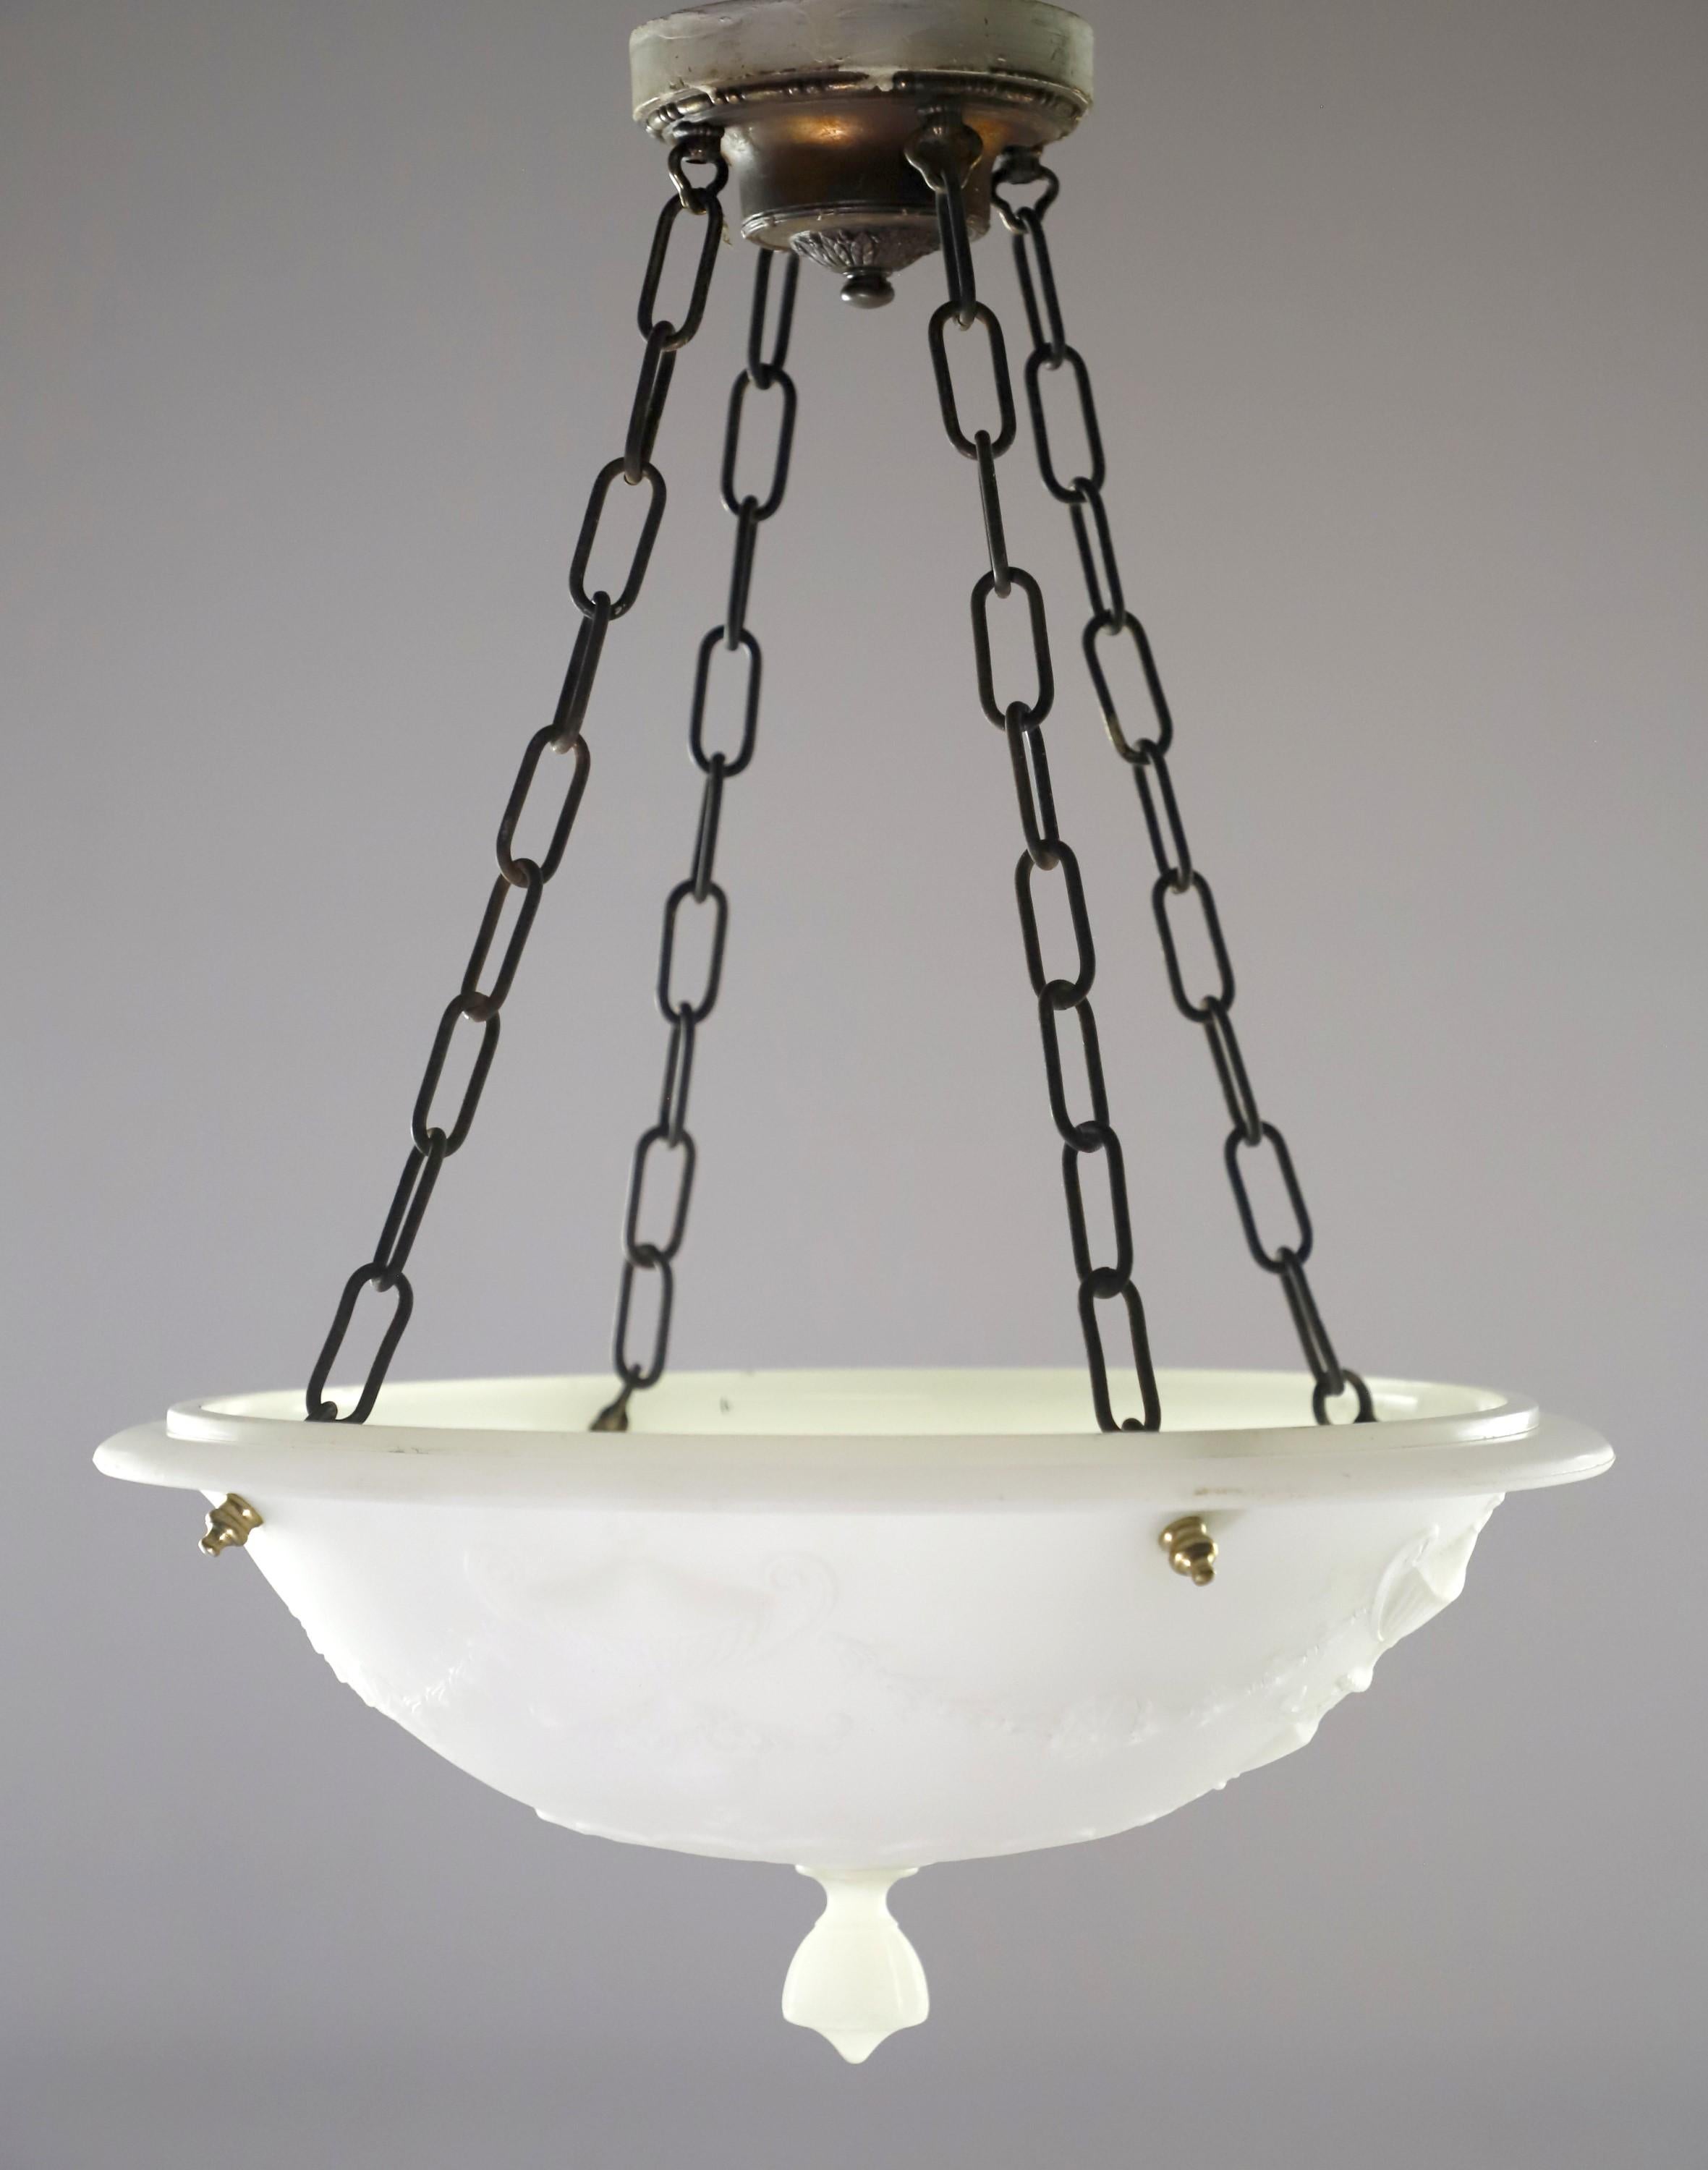 White cast milk glass dish pendant light with a floral, urn, and foliate motifs suspended from four chains with a bronze plated canopy. This will be cleaned and restored upon purchase. Takes four medium base light bulbs. Please note, this item is